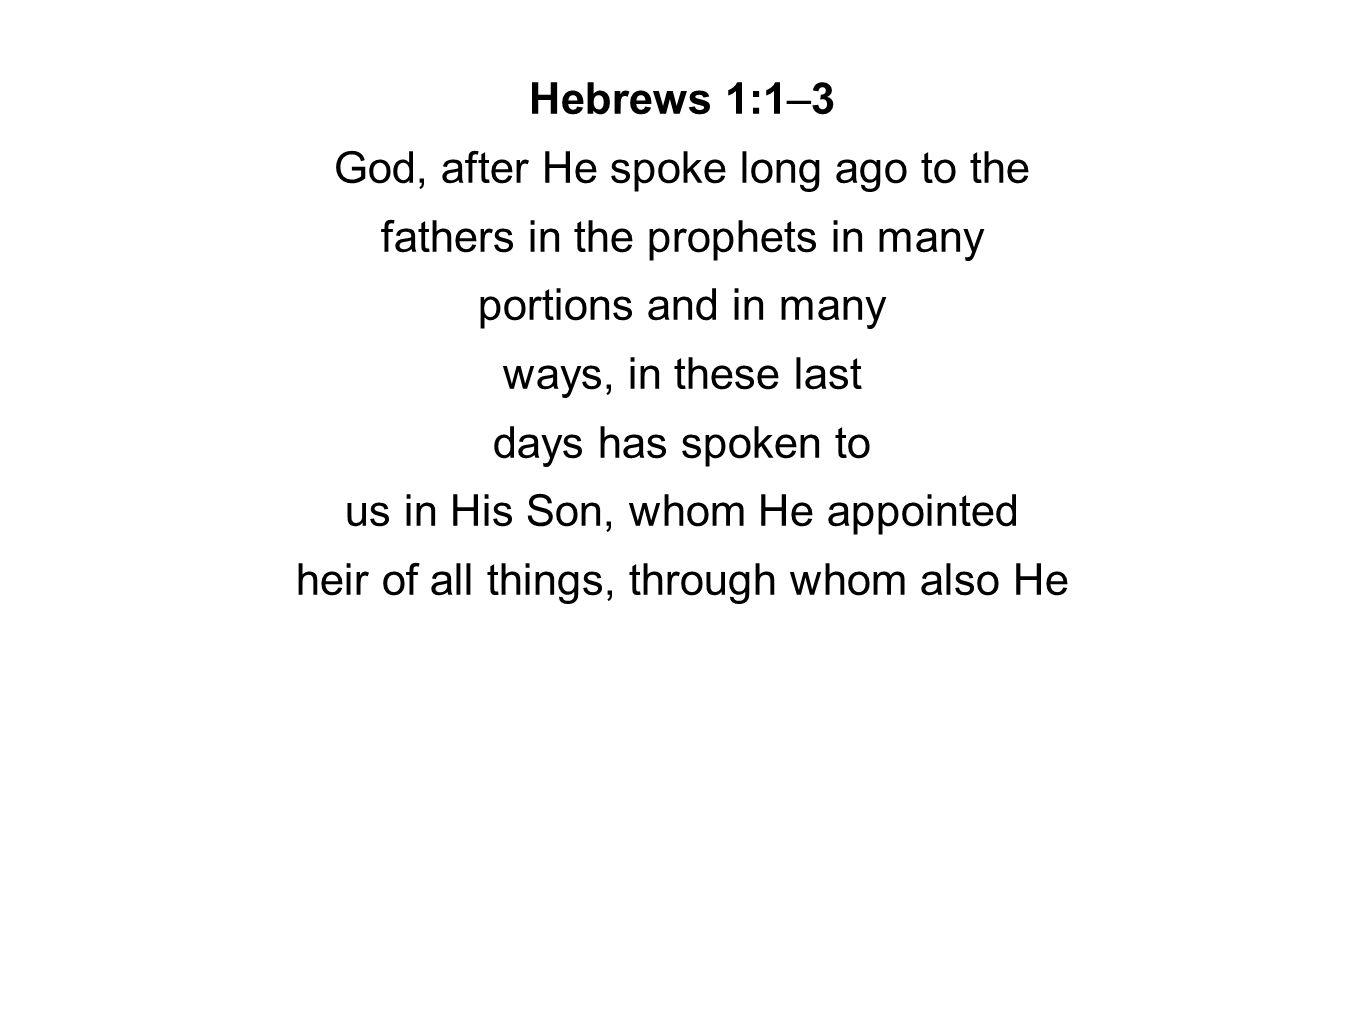 Hebrews 1:1–3 God, after He spoke long ago to the fathers in the prophets in many portions and in many ways, in these last days has spoken to us in His Son, whom He appointed heir of all things, through whom also He